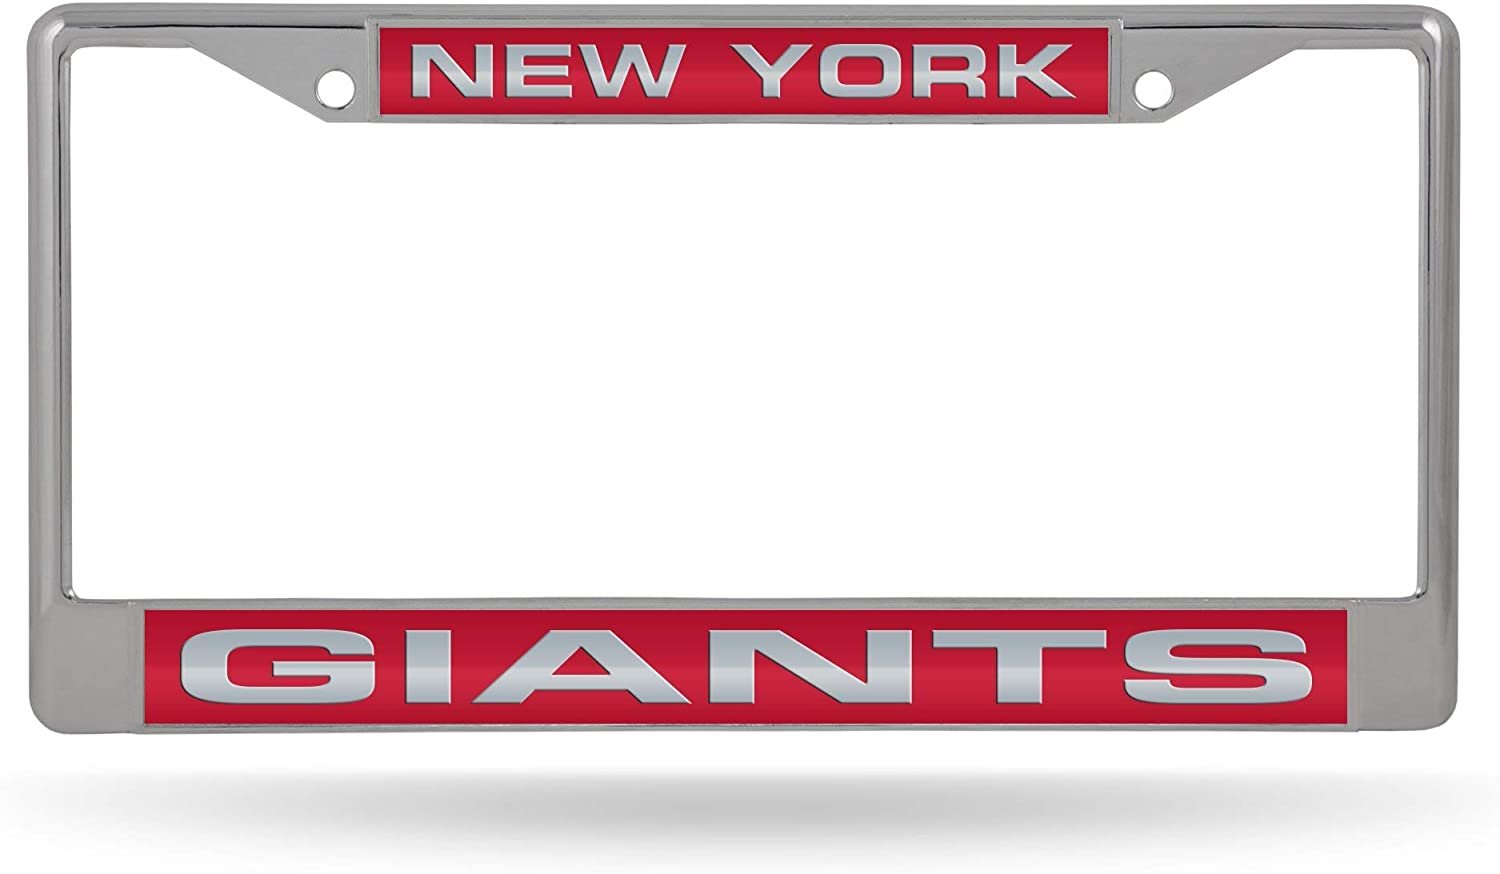 New York Giants Chrome Metal License Plate Frame Tag Cover, Laser Acrylic Mirrored Inserts, 12x6 Inch